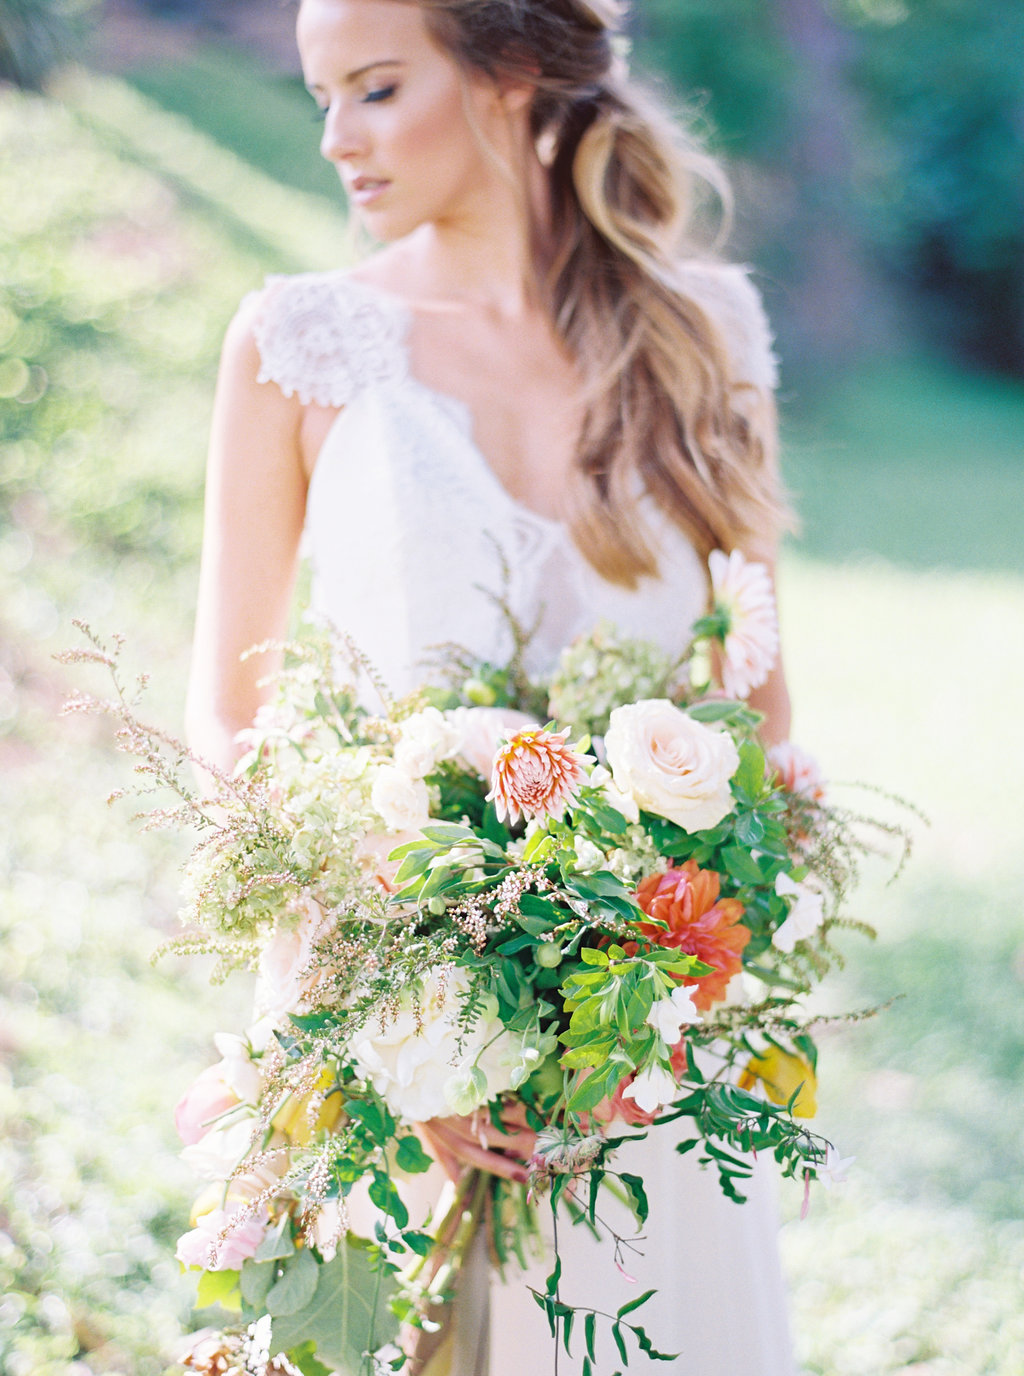 Bride with Romantic Large Greenery Bouquet